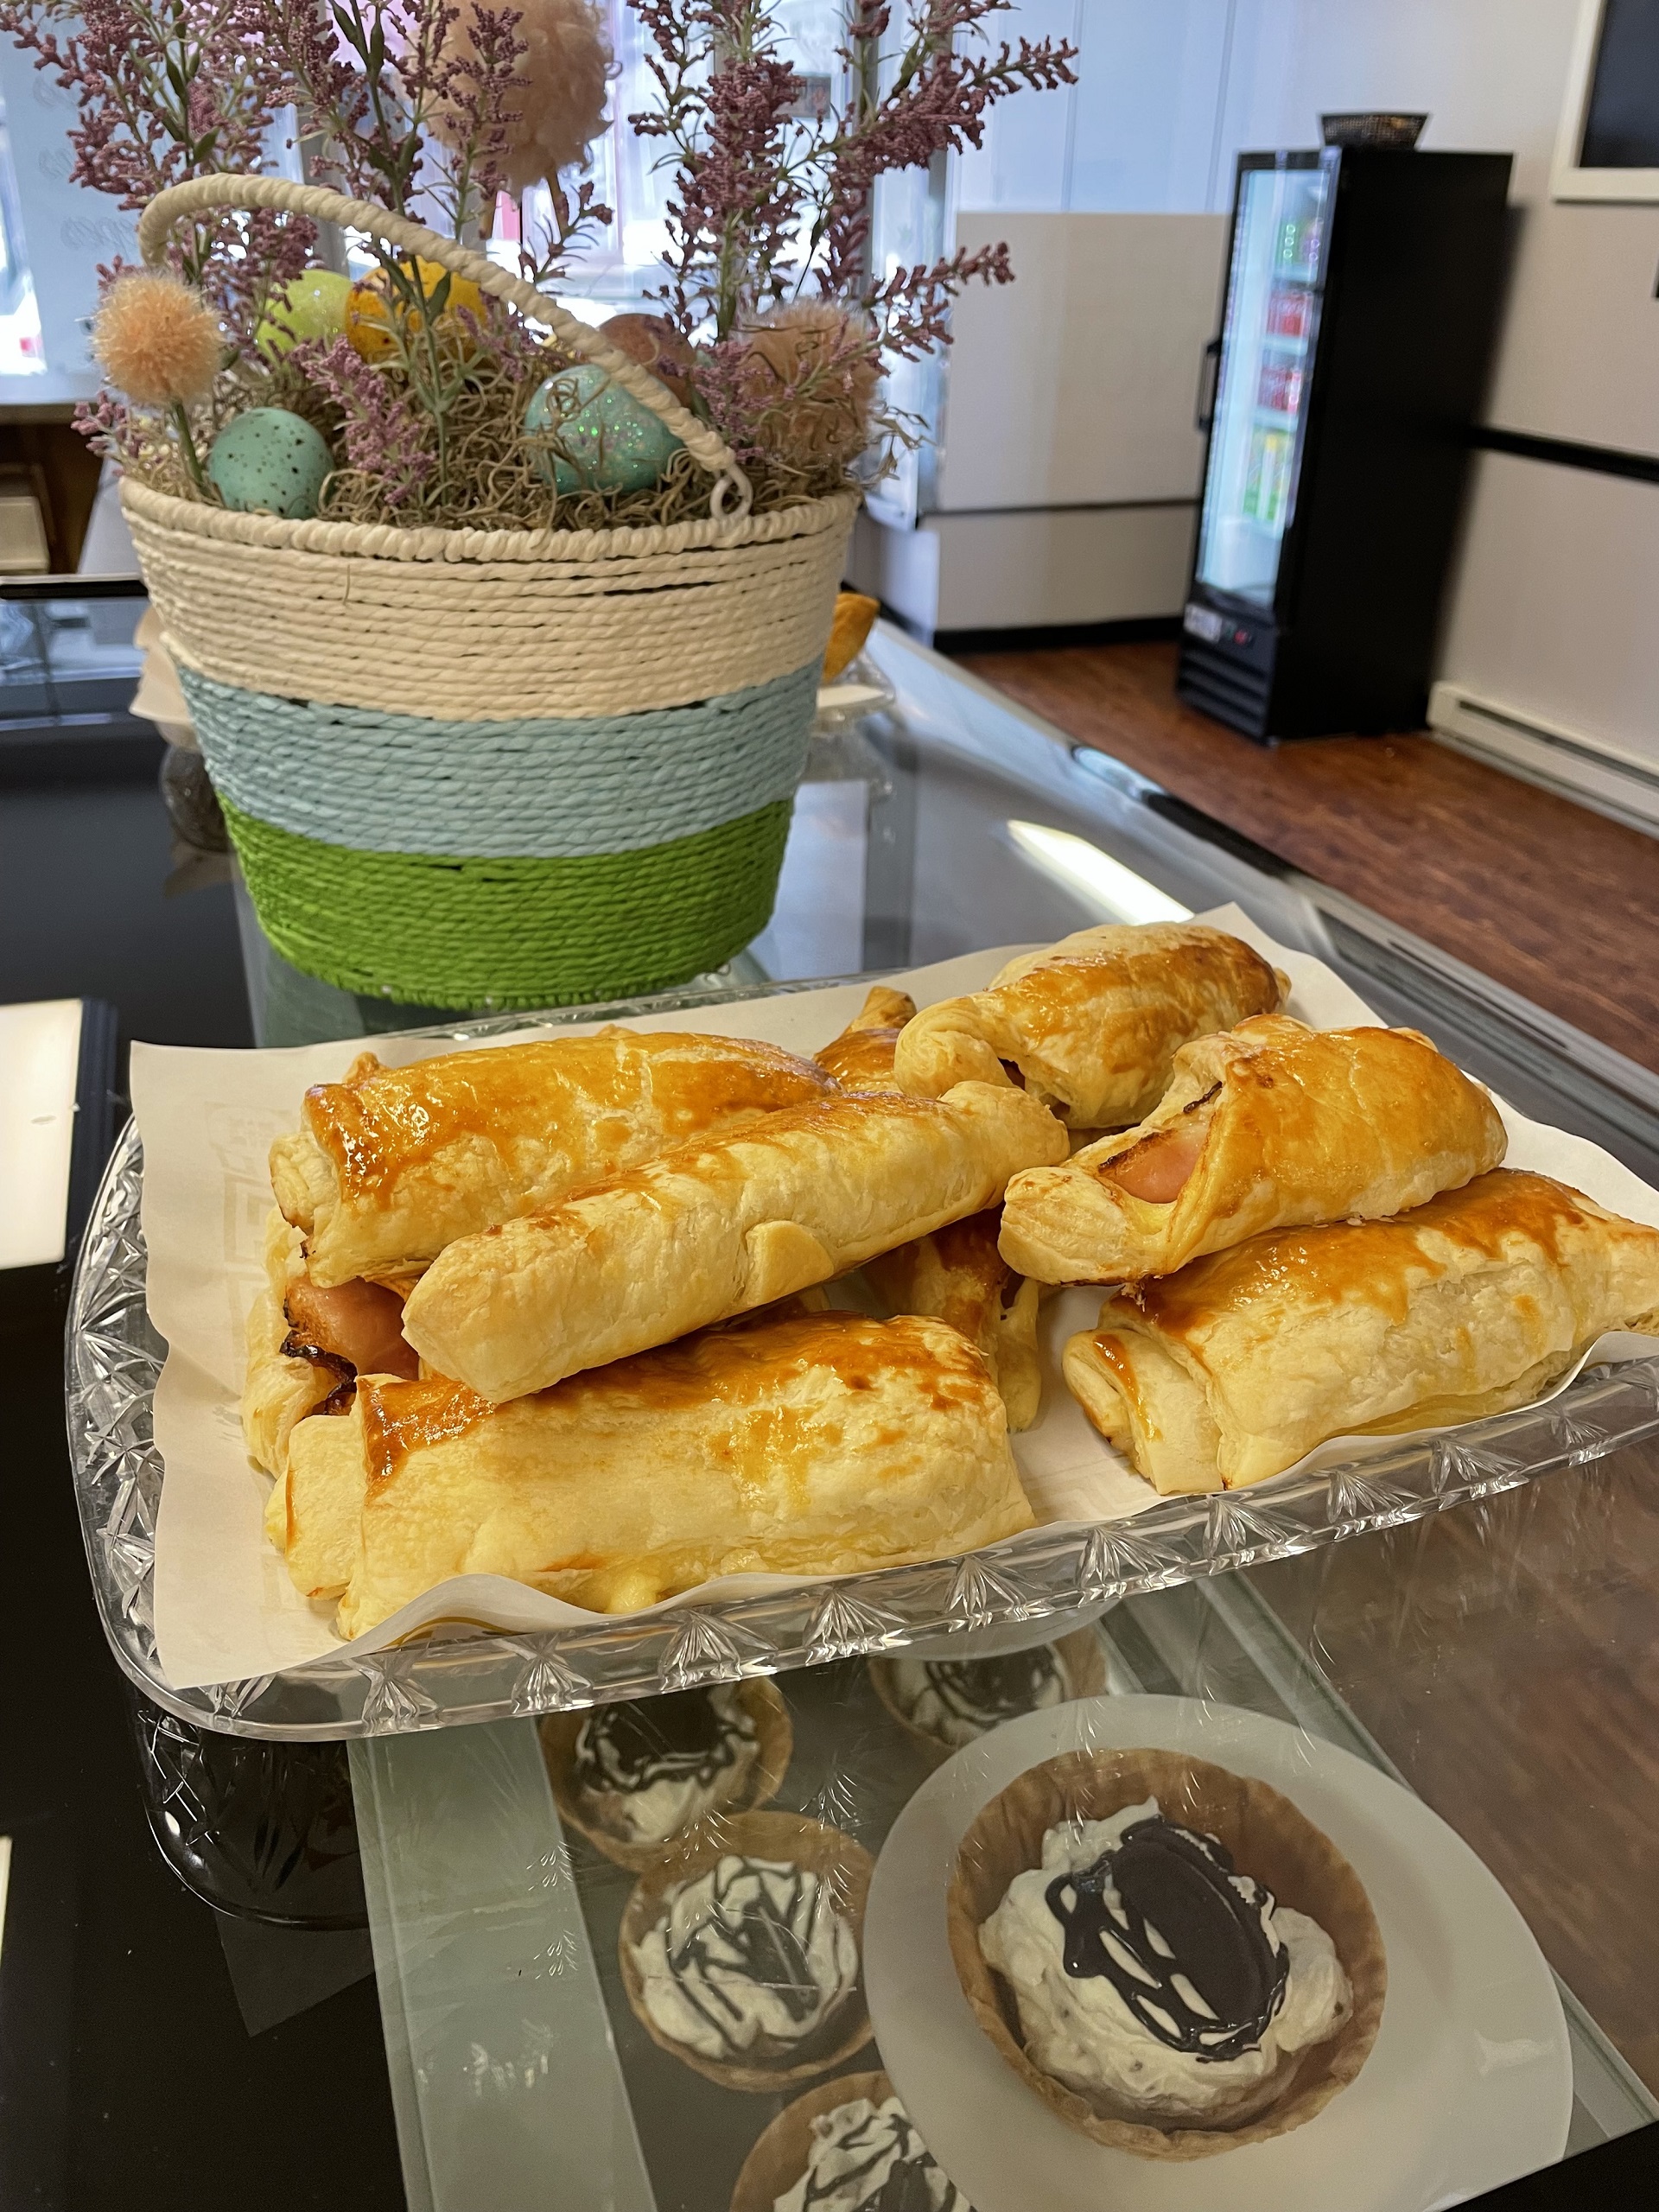 Kat's savory croissants filled with ham and cheese on display at the Minersville location and below you see homemade sweet cream with oreos in a handmade waffle bowl.